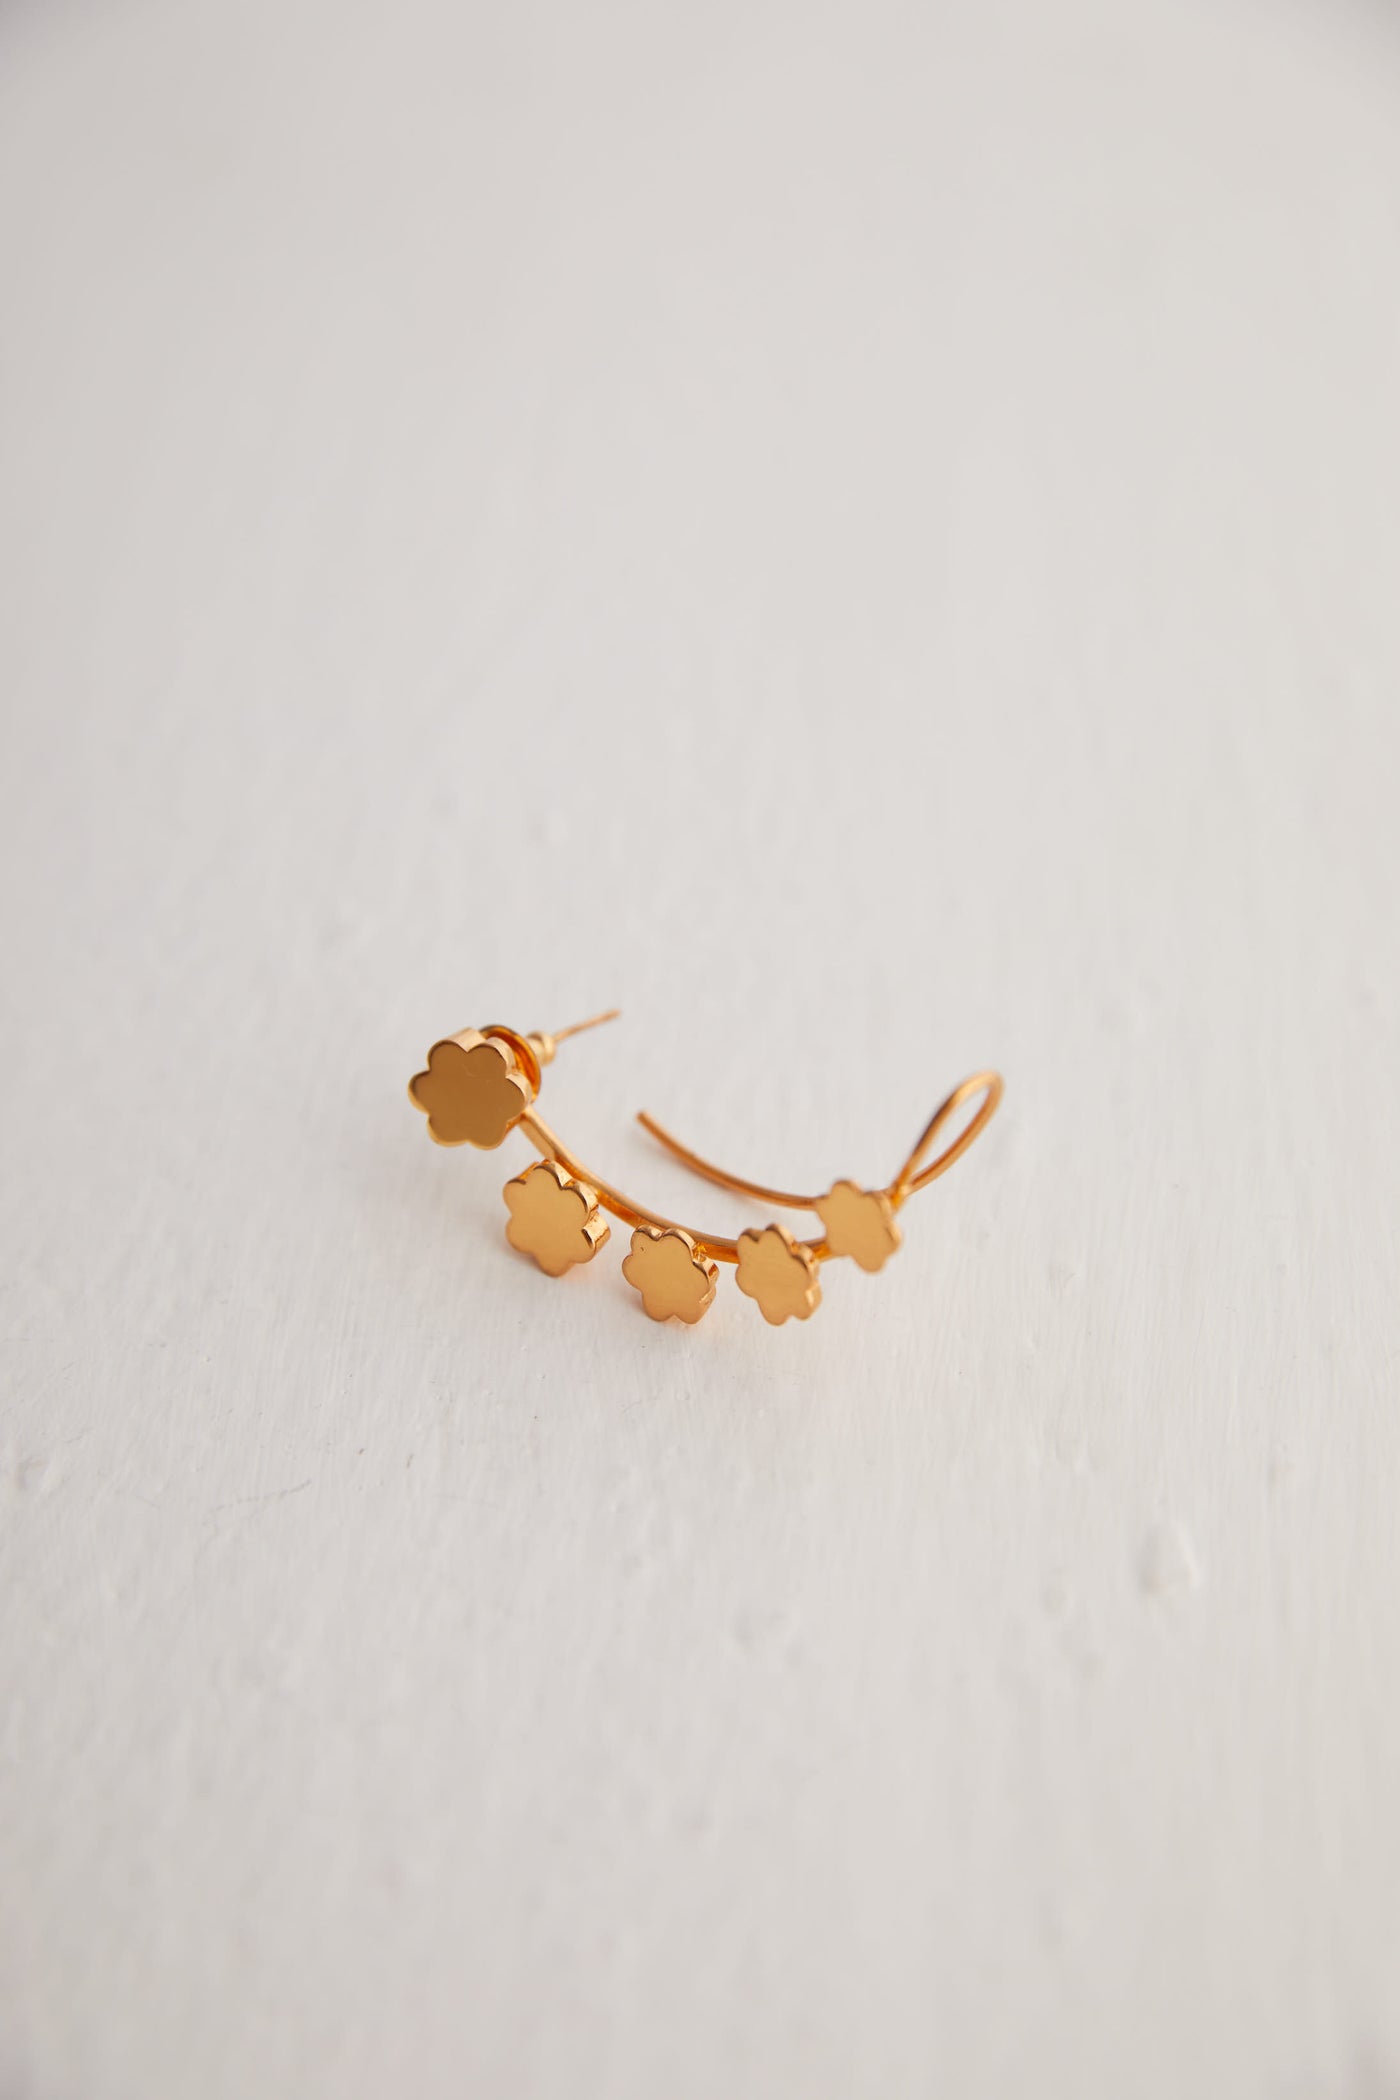 Outhouse jewellery OH Poppi Clump Earcuff gold online shopping melange singapore indian designer wear